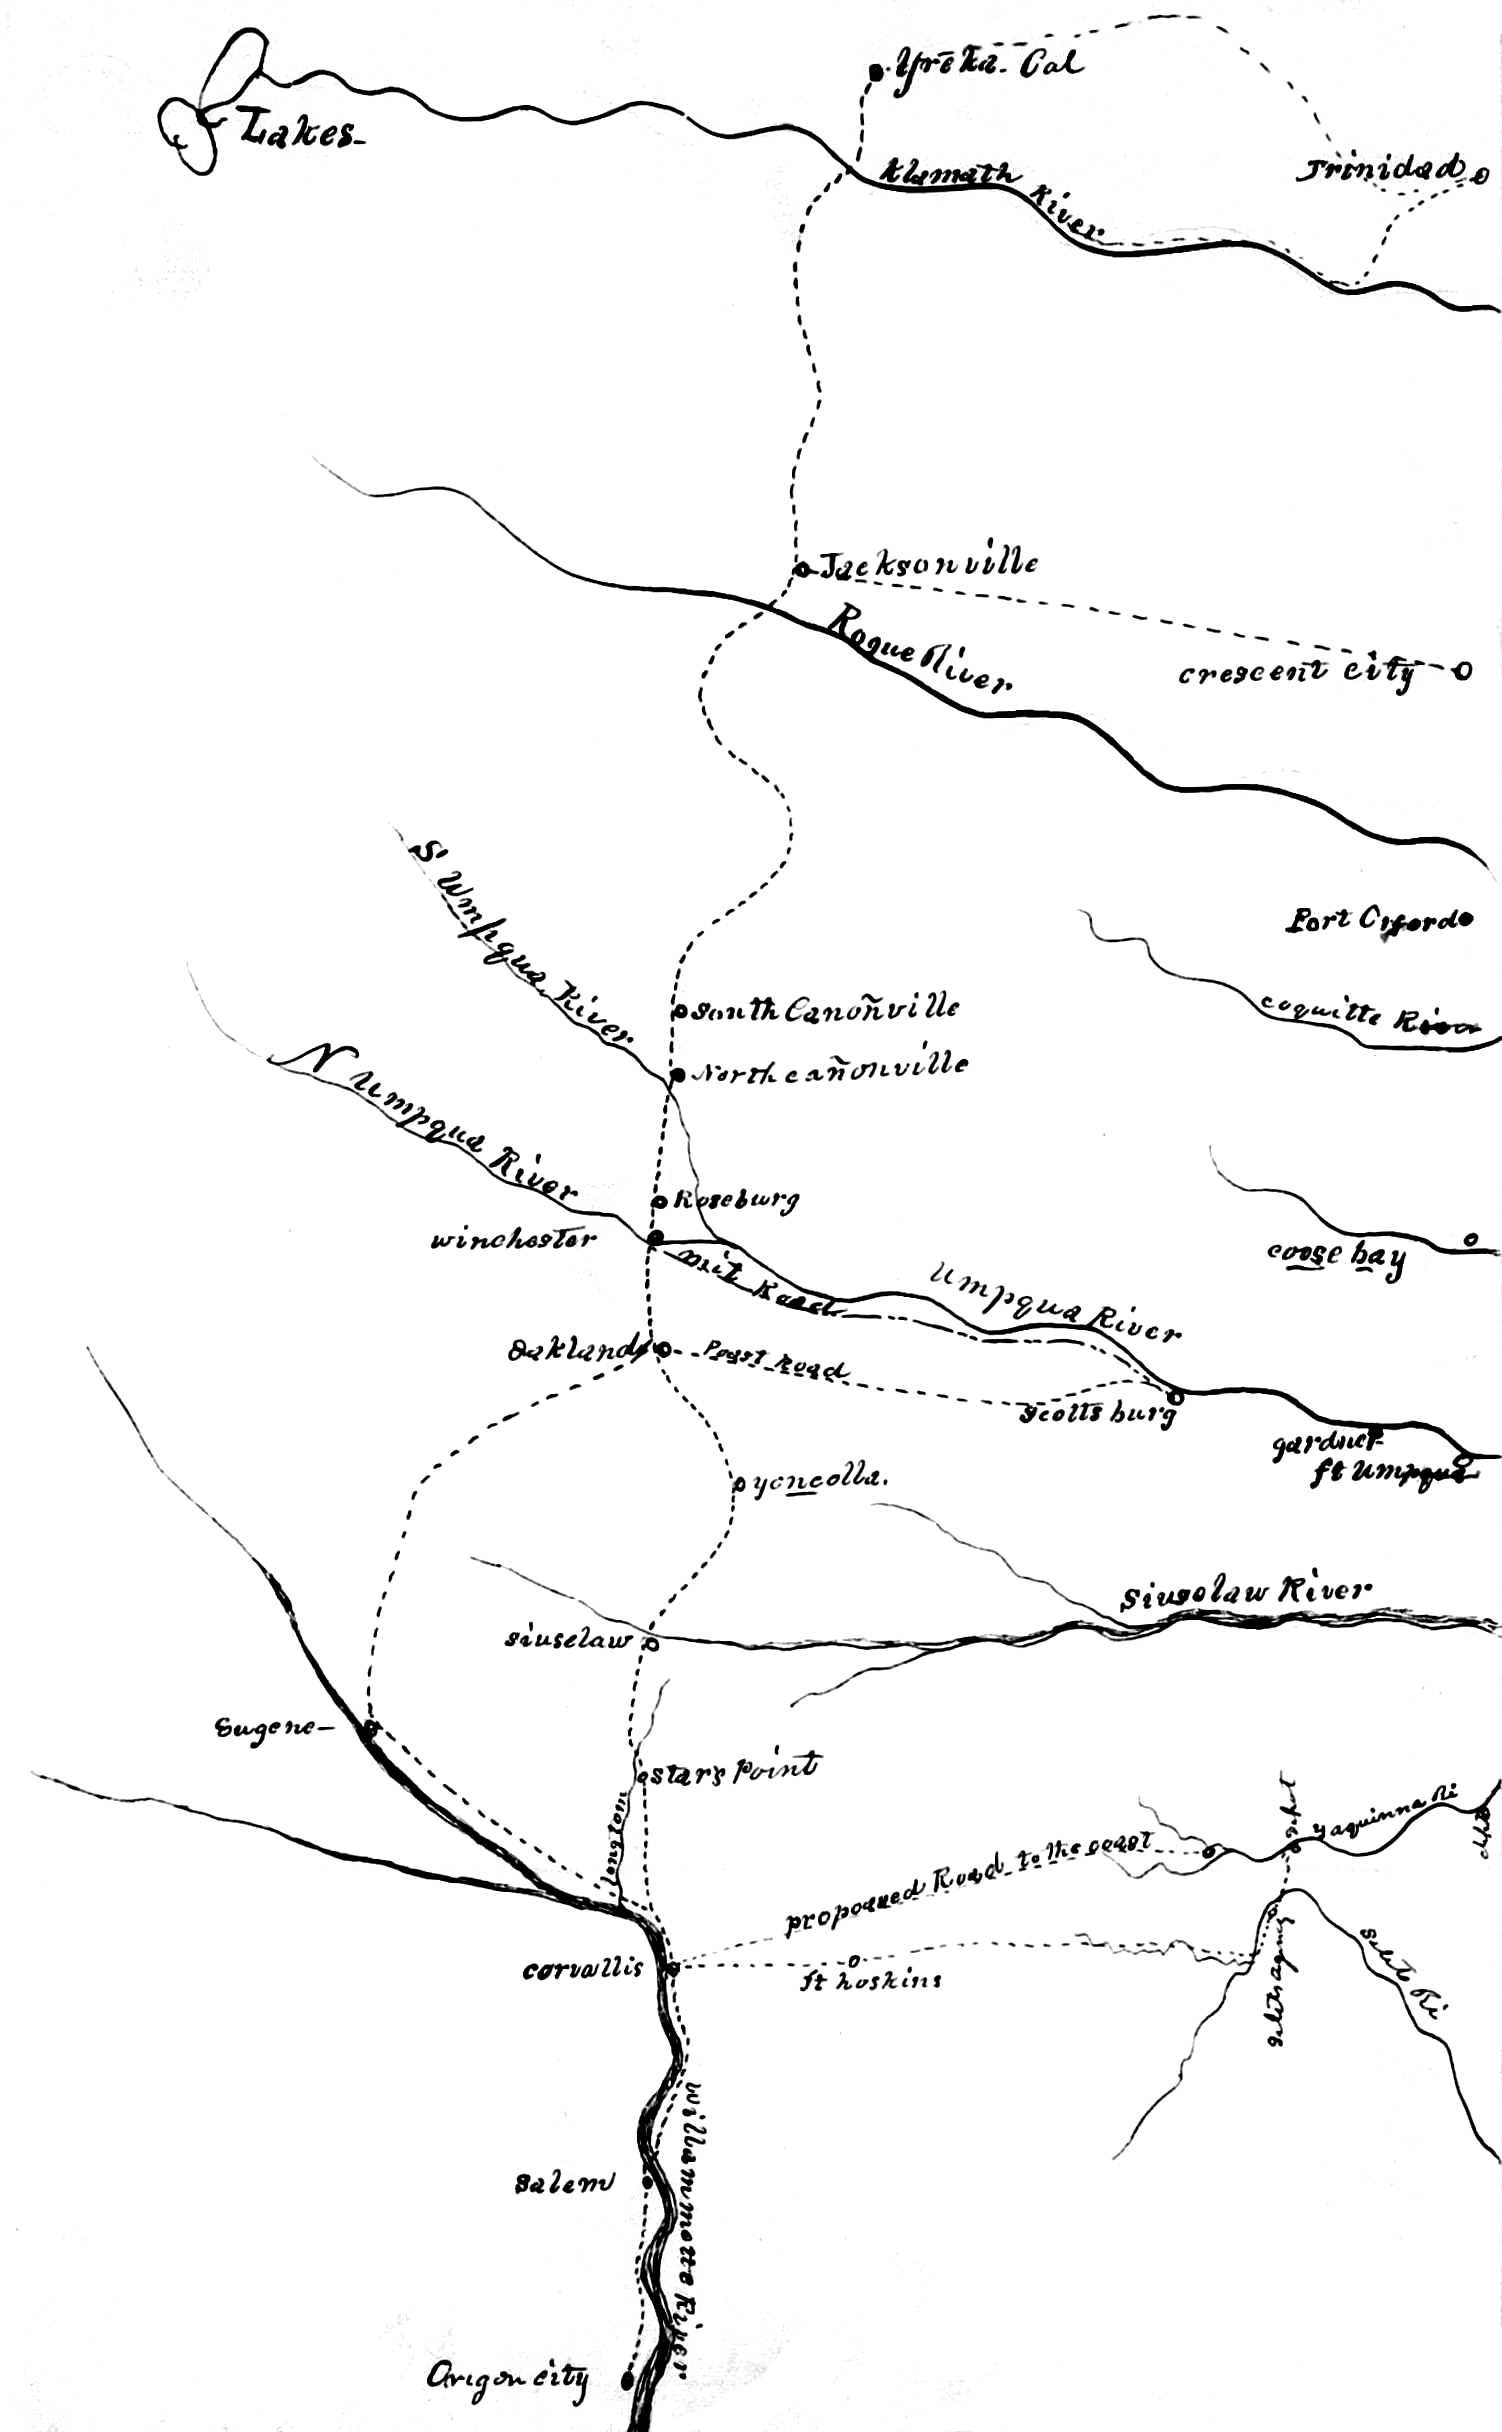 B. F. Dowell's map of postal routes, 1858